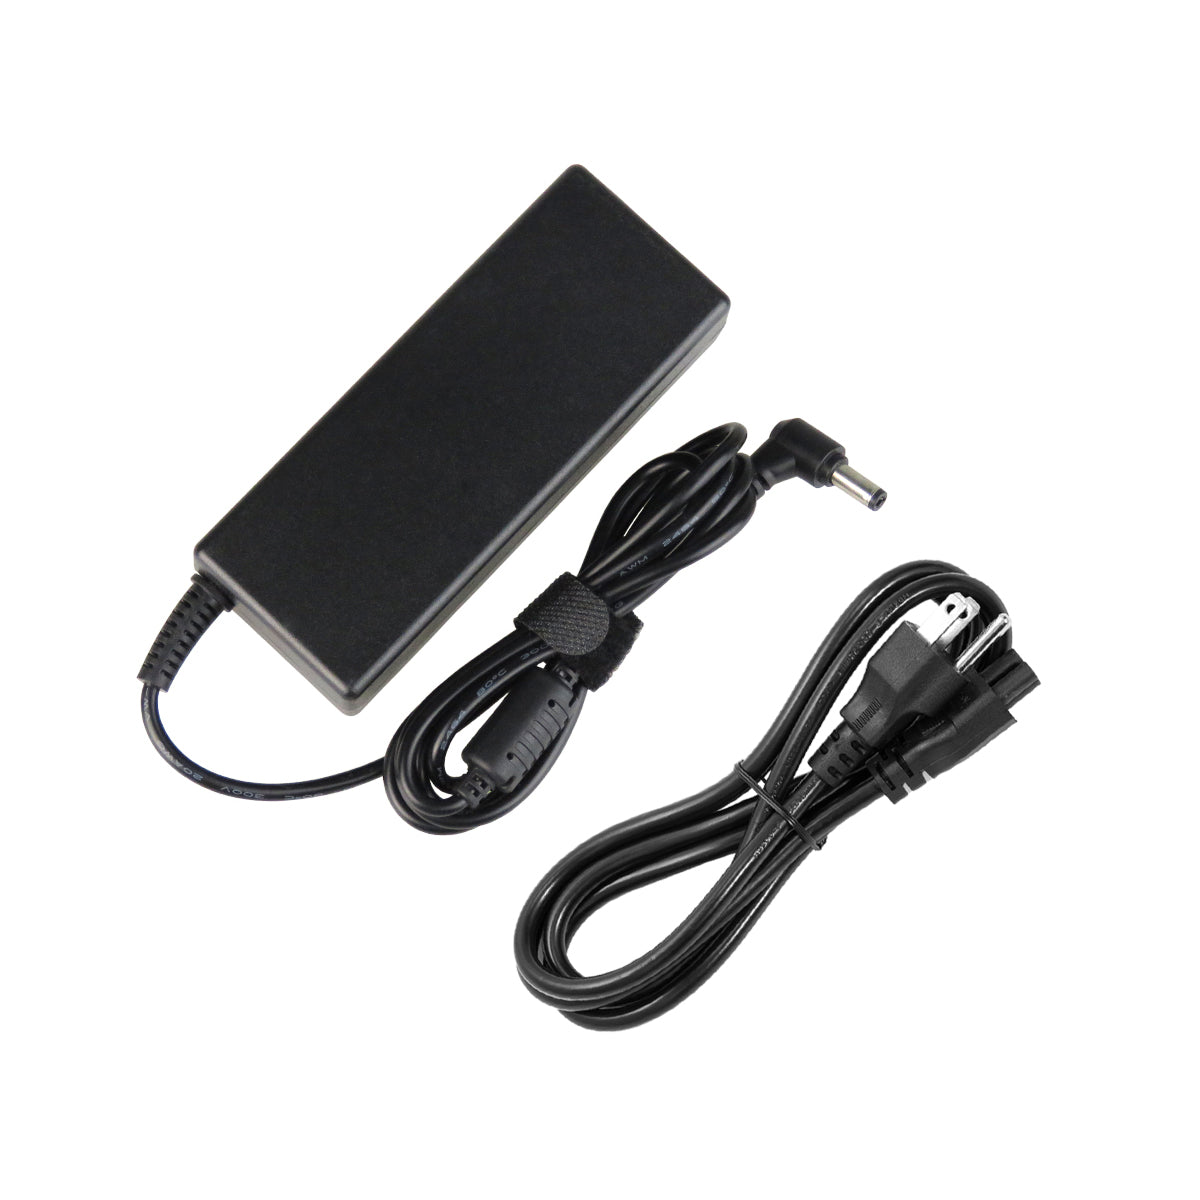 AC Adapter Charger for ASUS A8Jp Notebook.